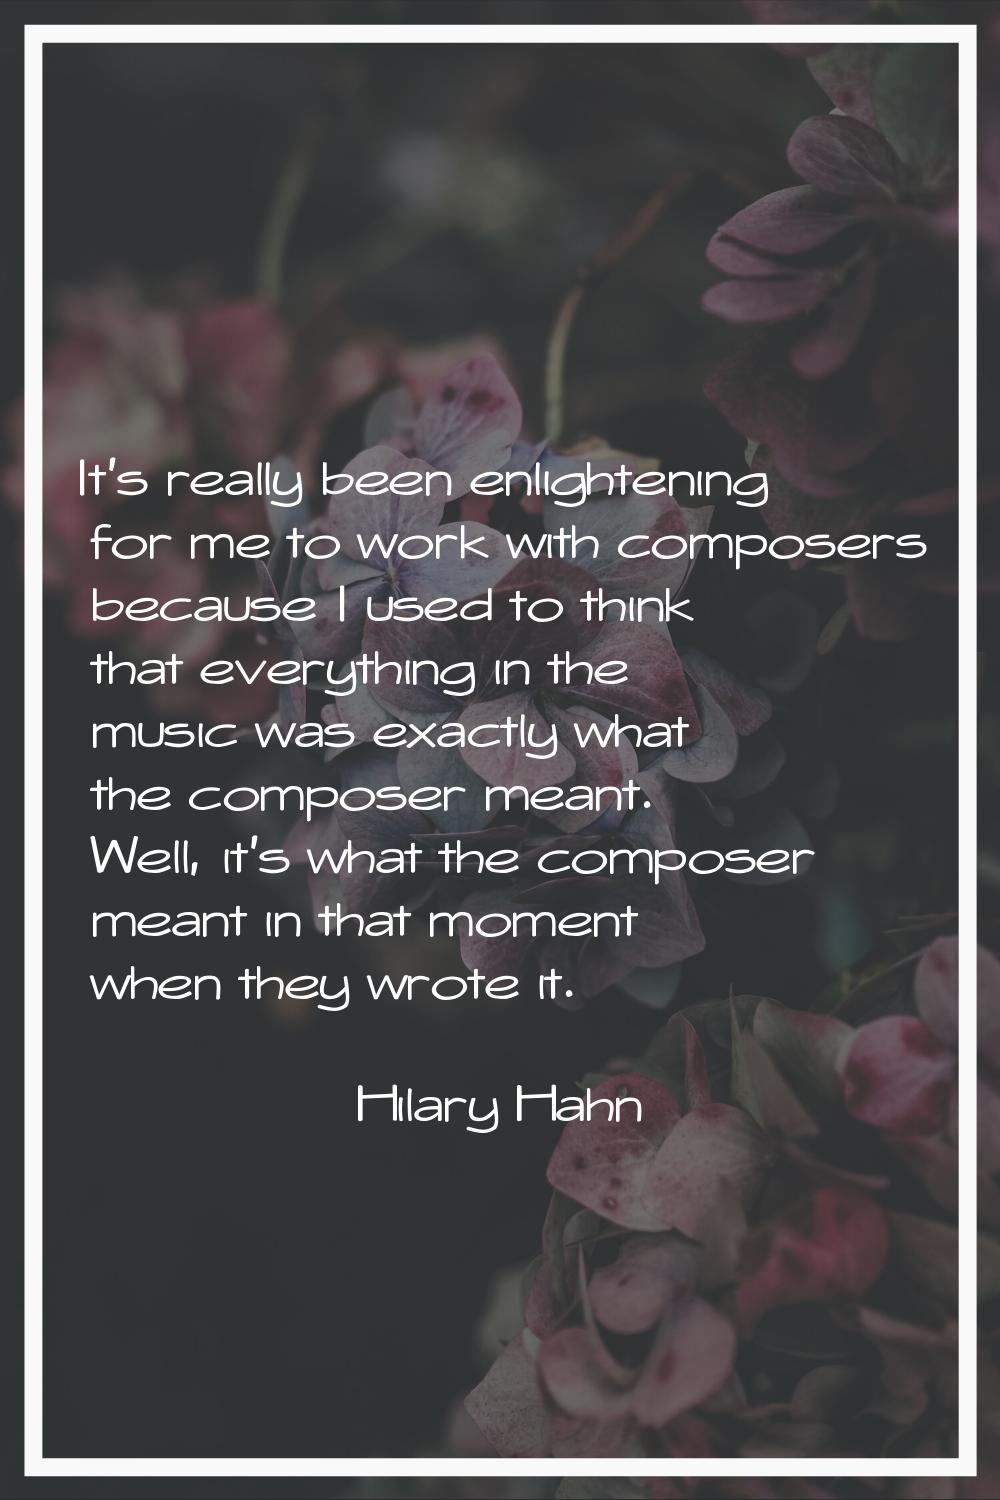 It's really been enlightening for me to work with composers because I used to think that everything